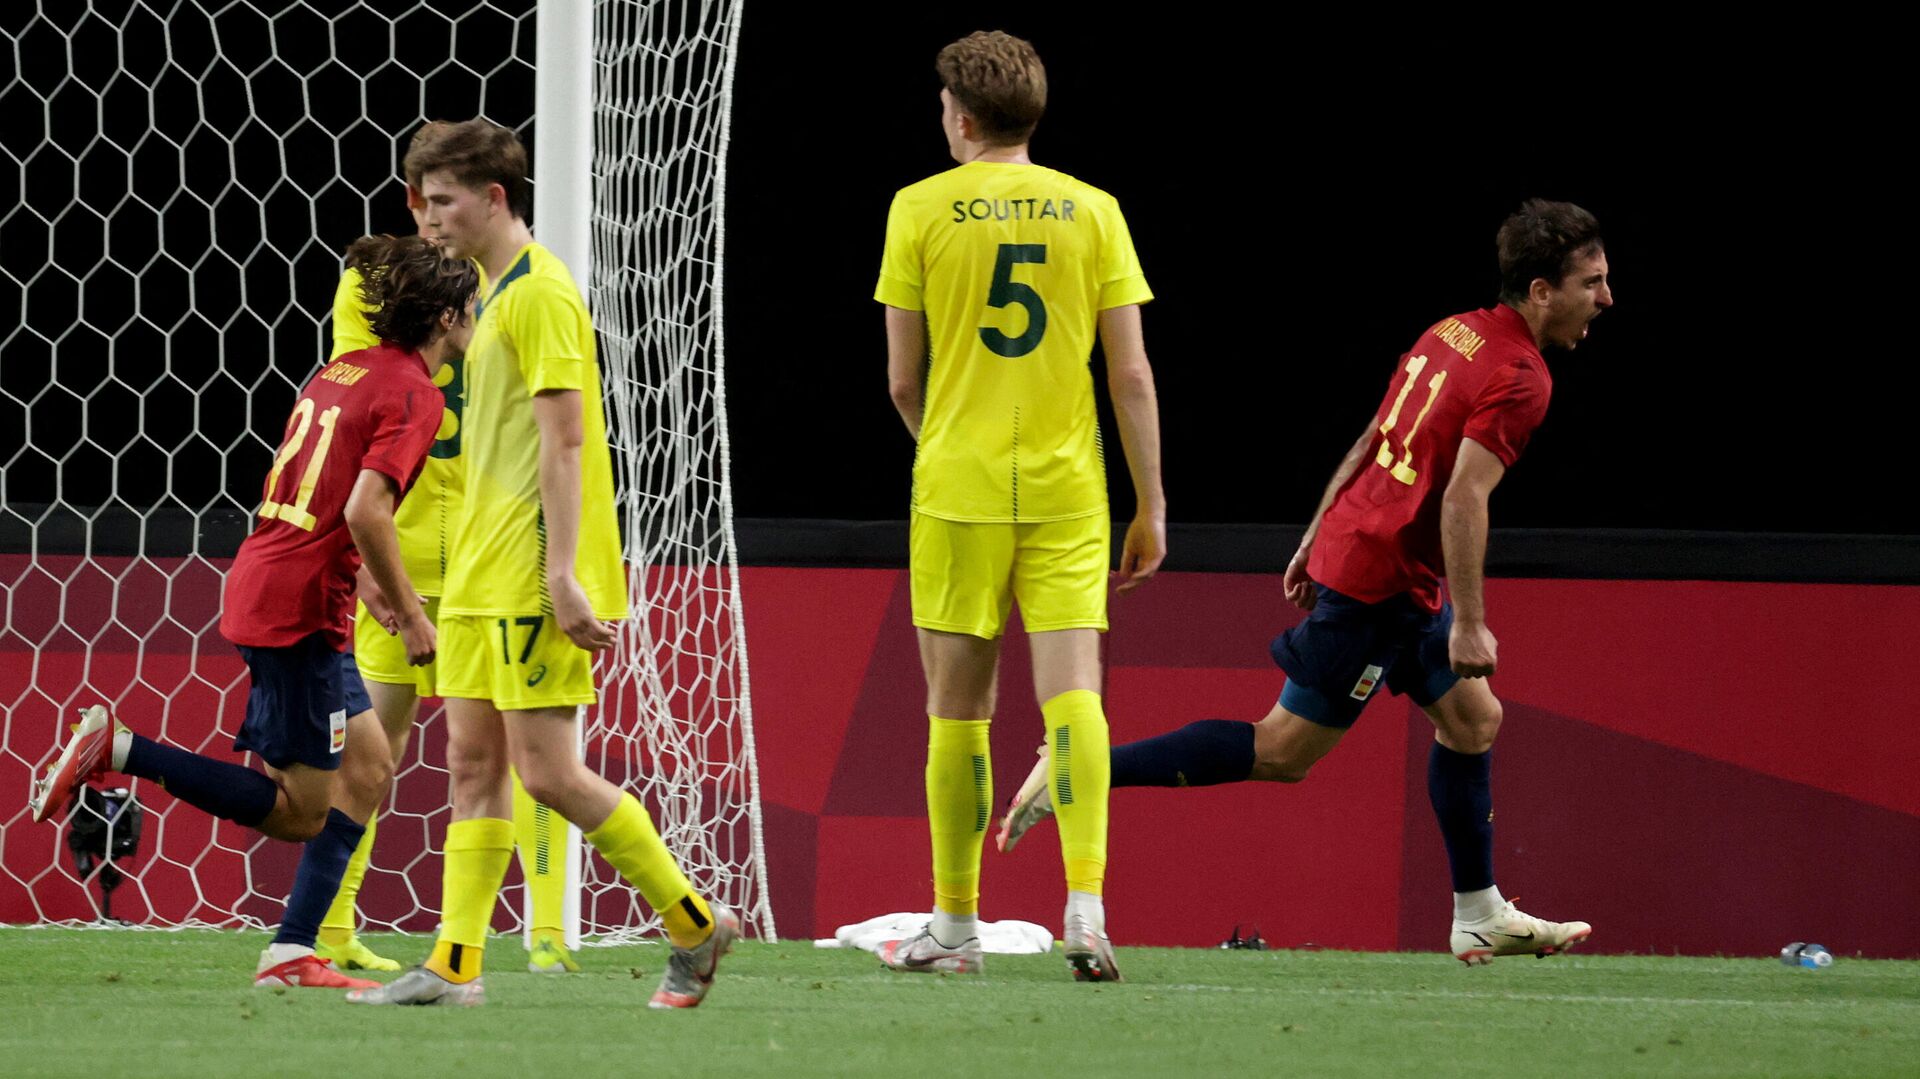 Spain's forward Mikel Oyarzabal (R) shouts in jubilation after scoring a goal during the Tokyo 2020 Olympic Games men's group C first round football match between Australia and Spain at Sapporo Dome in Sapporo on July 25, 2021. (Photo by ASANO IKKO / AFP) - РИА Новости, 1920, 25.07.2021